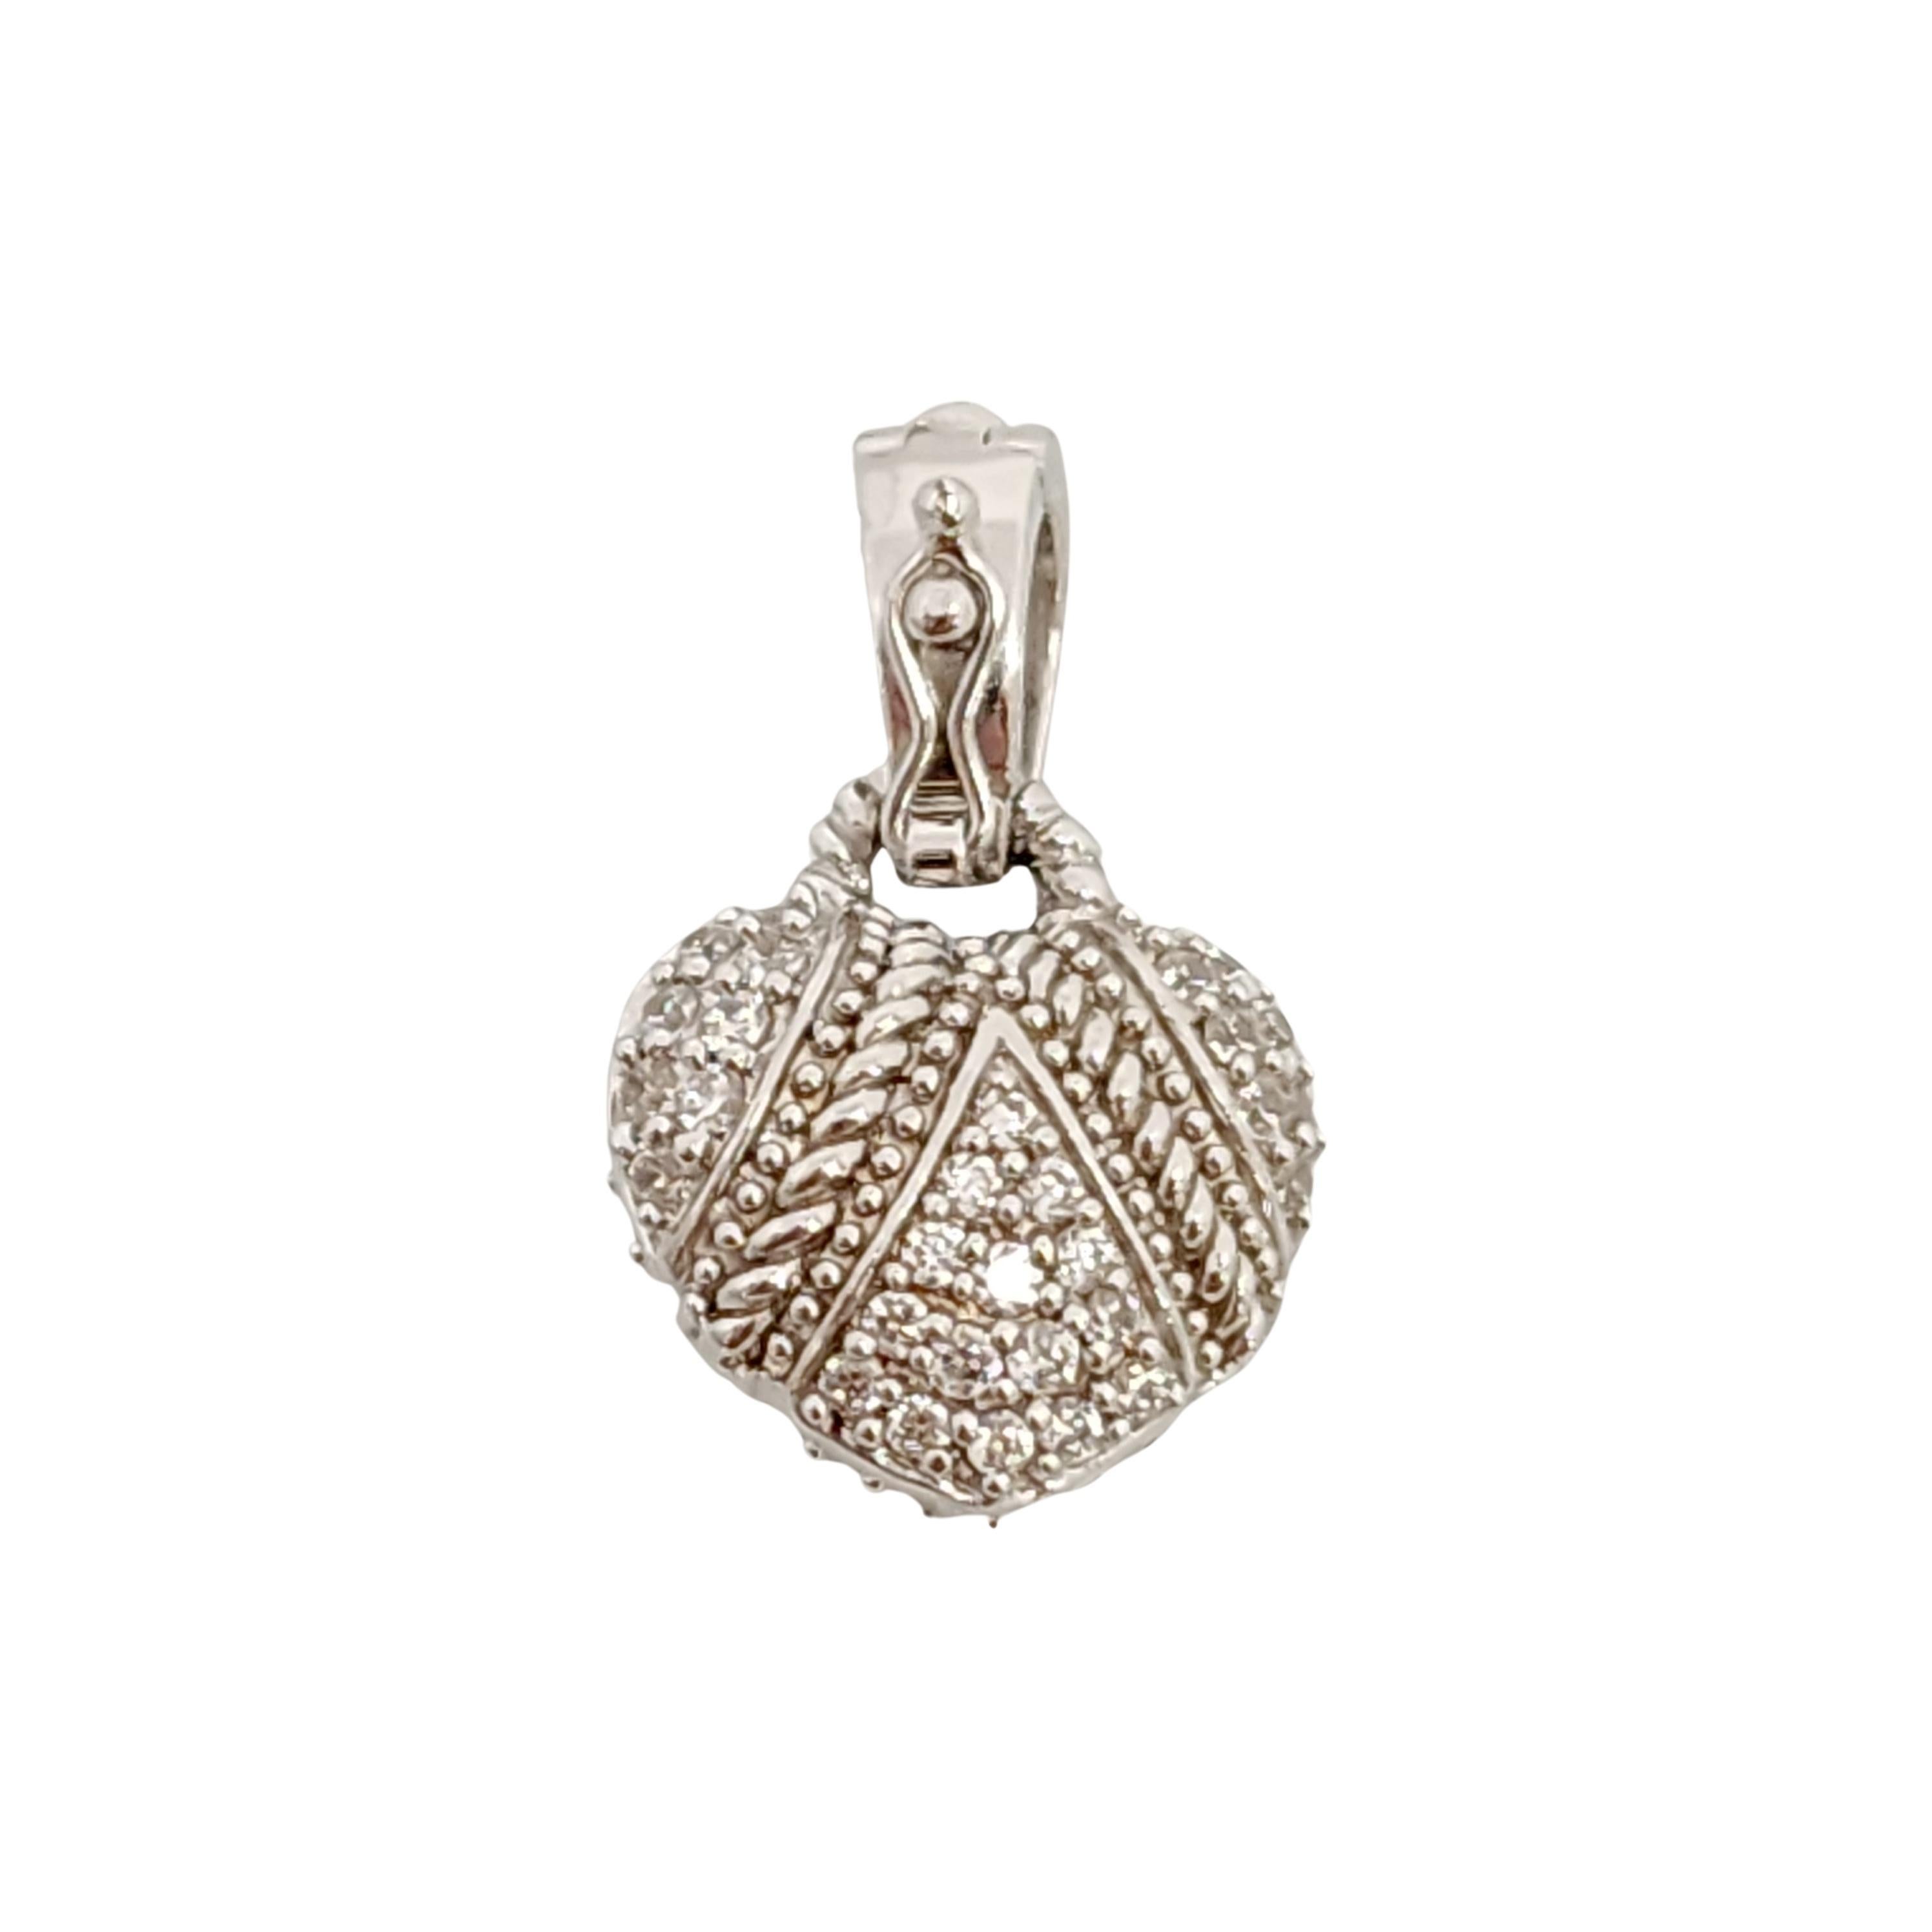 Sterling silver CZ heart pendant by Judith Ripka.

Beautiful puffy heart design pendant encrusted in CZs with bead and twist rope accents on both sides. Snap hinged bale with safety lock.

Measures approx 1 1/8